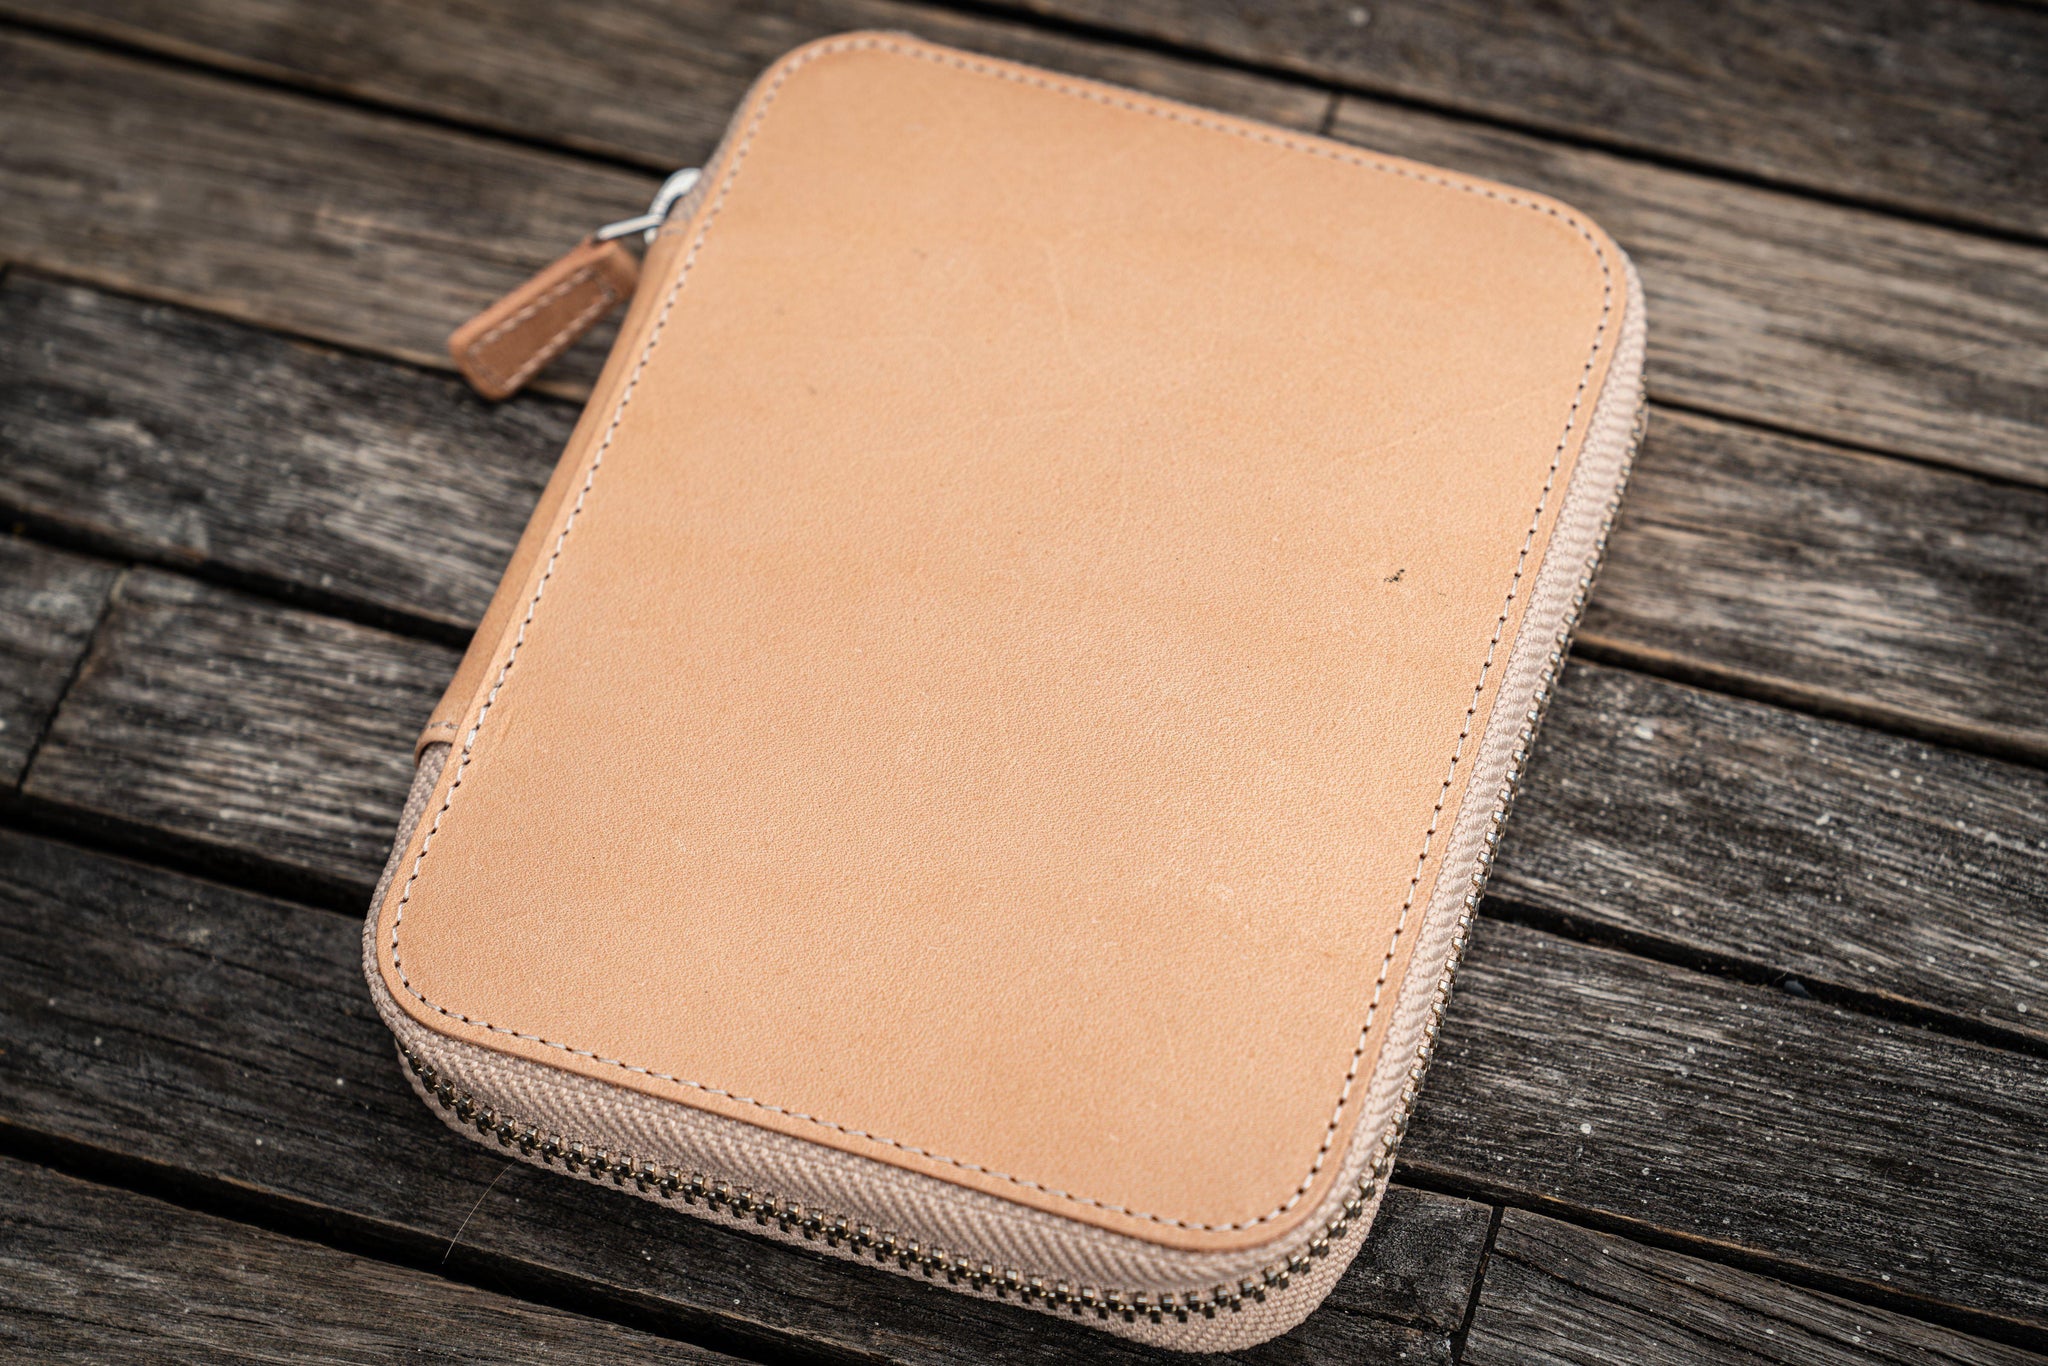 Galen Leather Zippered Duo Slim Pen Case for 2 Pens - Undyed Leather